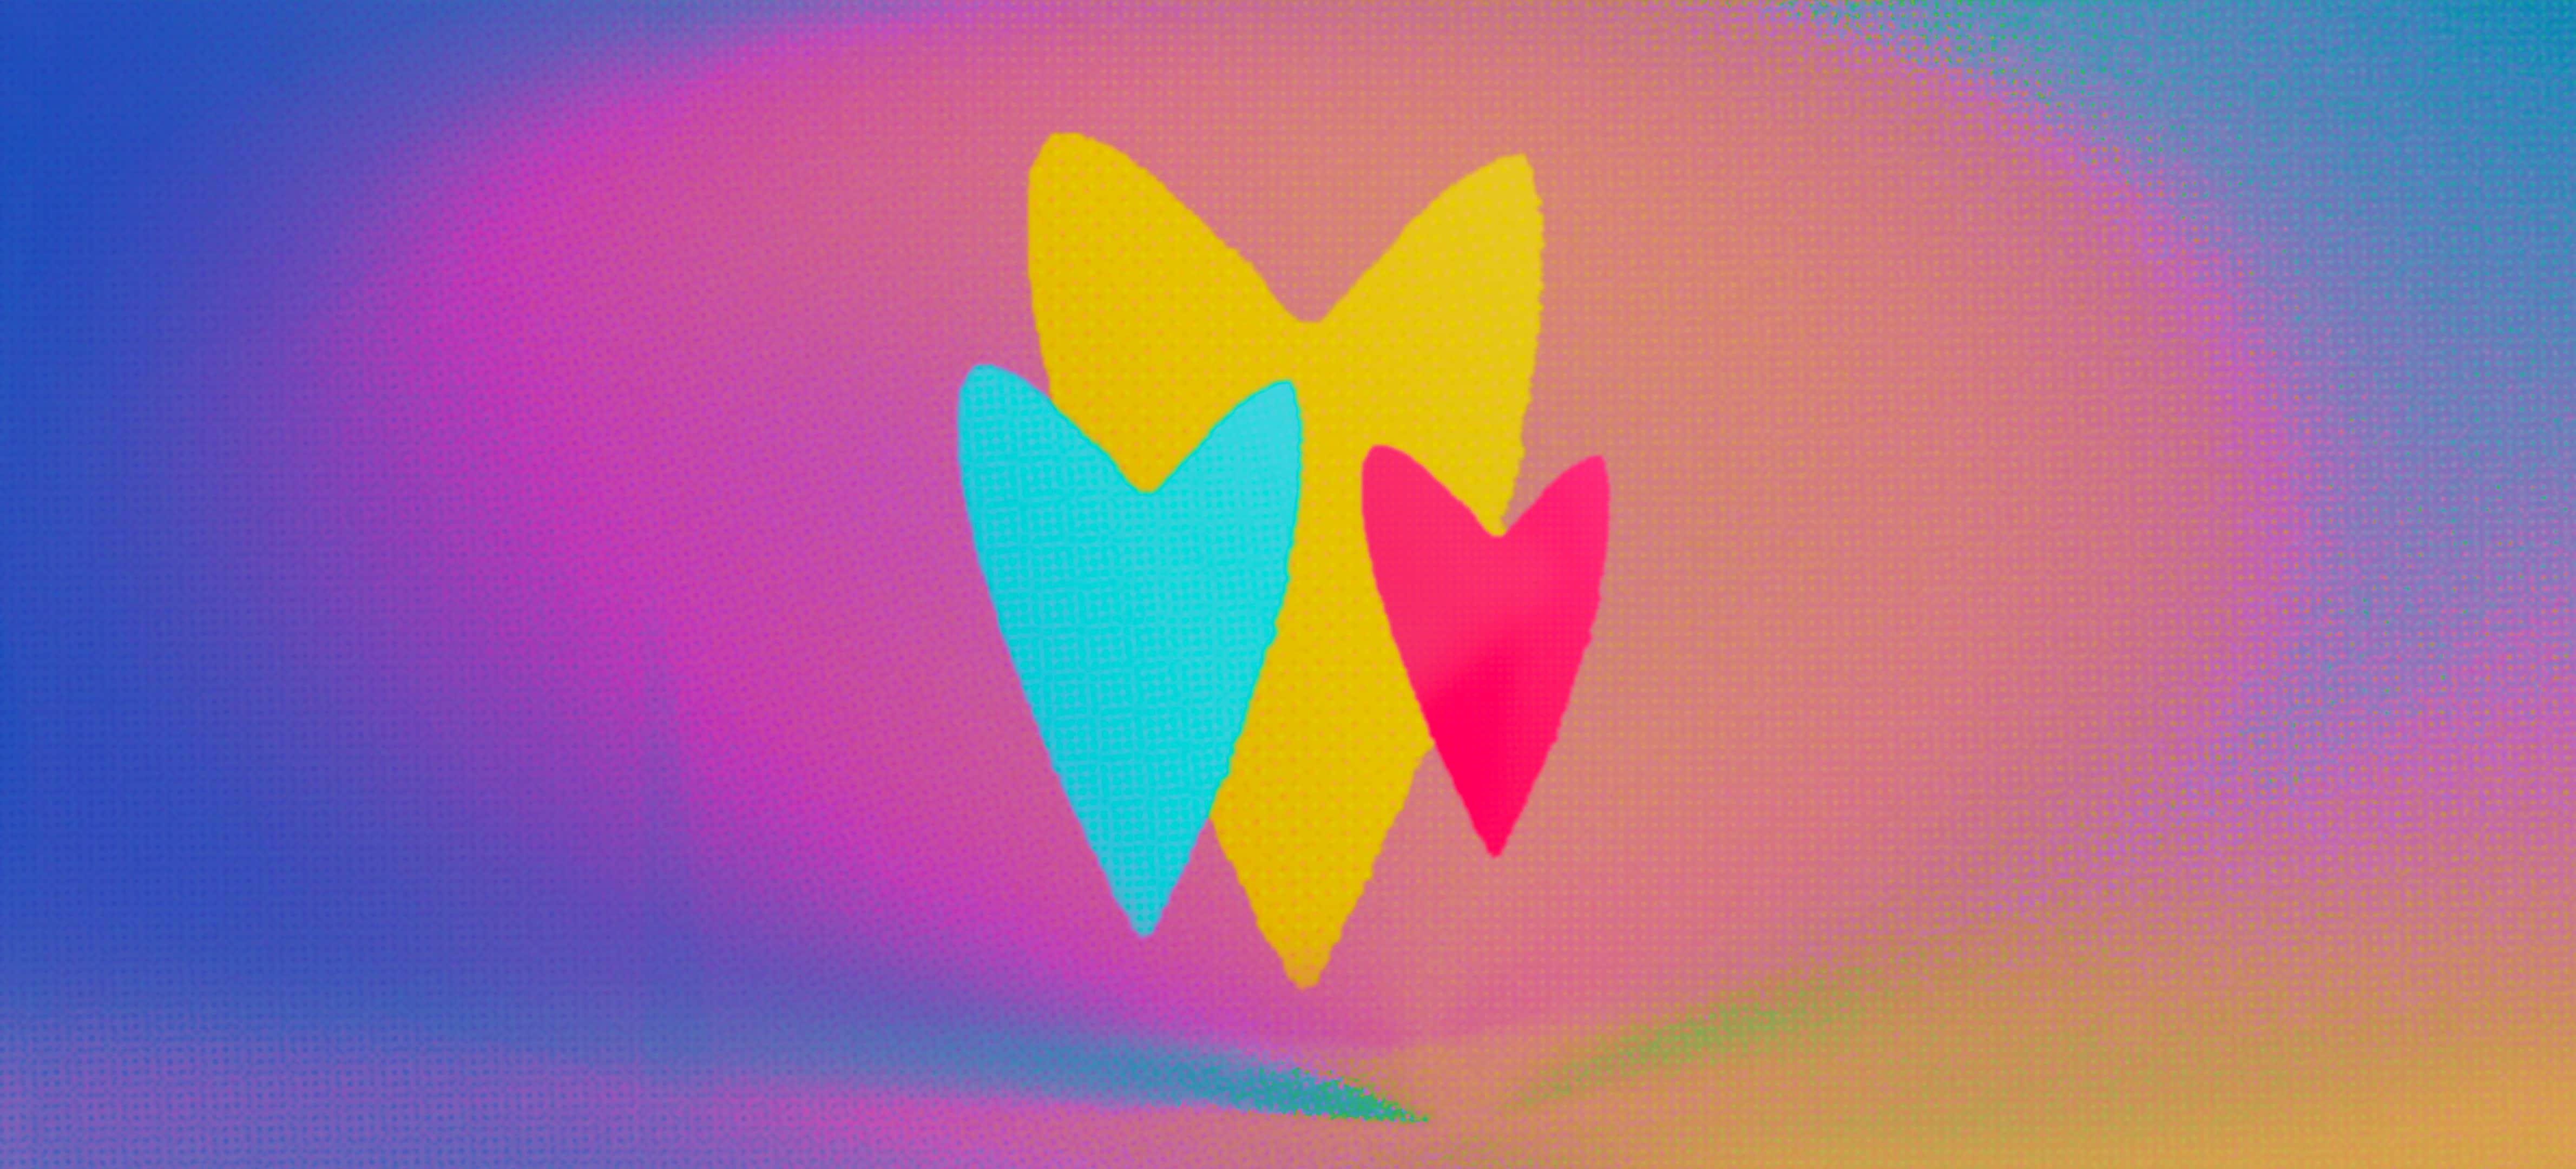 Three colorful hearts on a warm gradient background